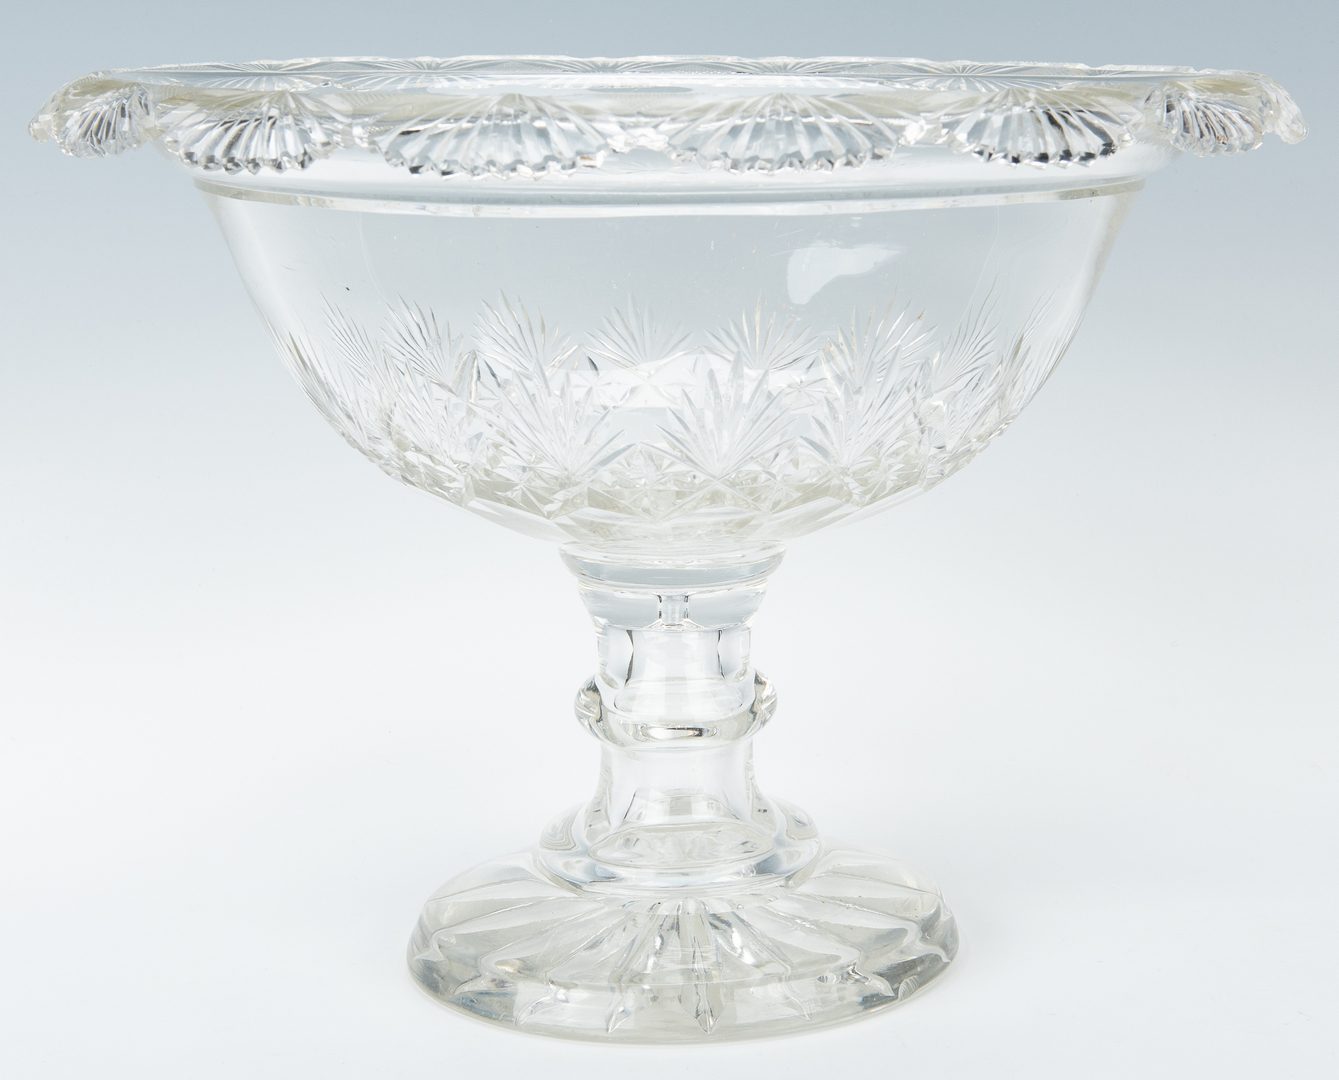 Lot 243: Anglo-Irish Cut-Crystal: 3 Decanters & 1 Fruit Bowl